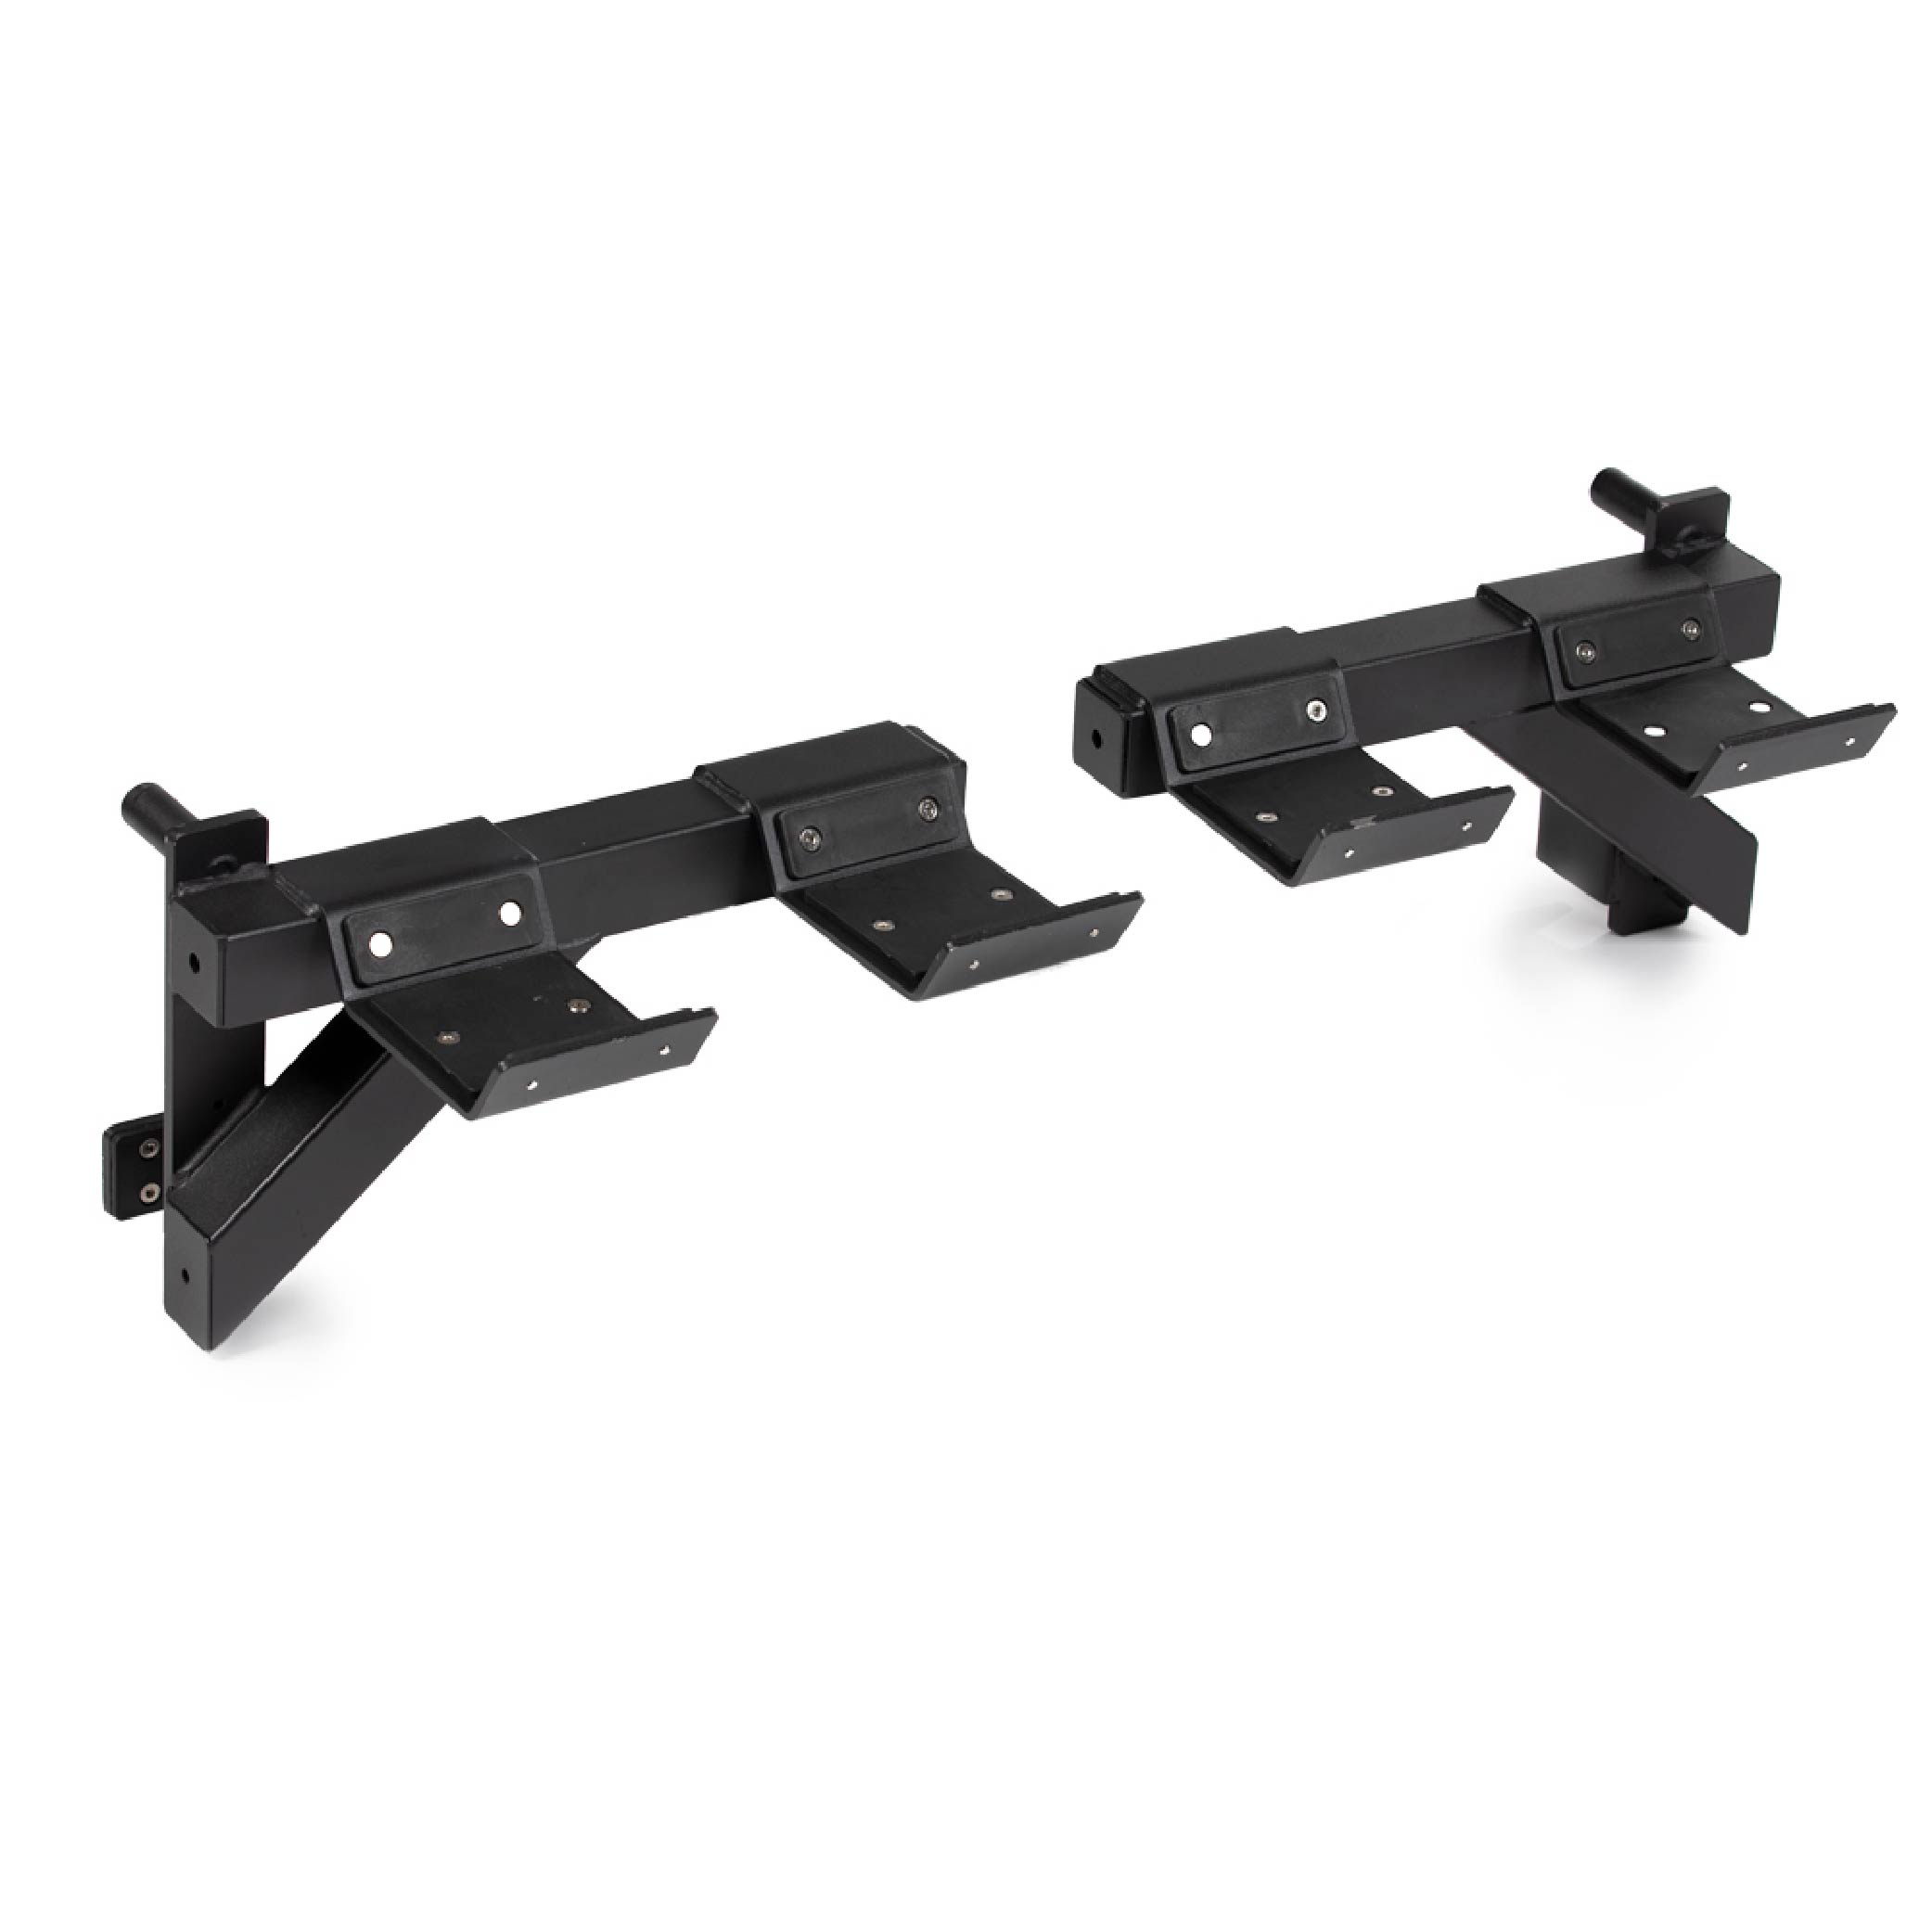 T-2 Series Dumbbell Weight Bar Holders - J-Hook Style Mounting